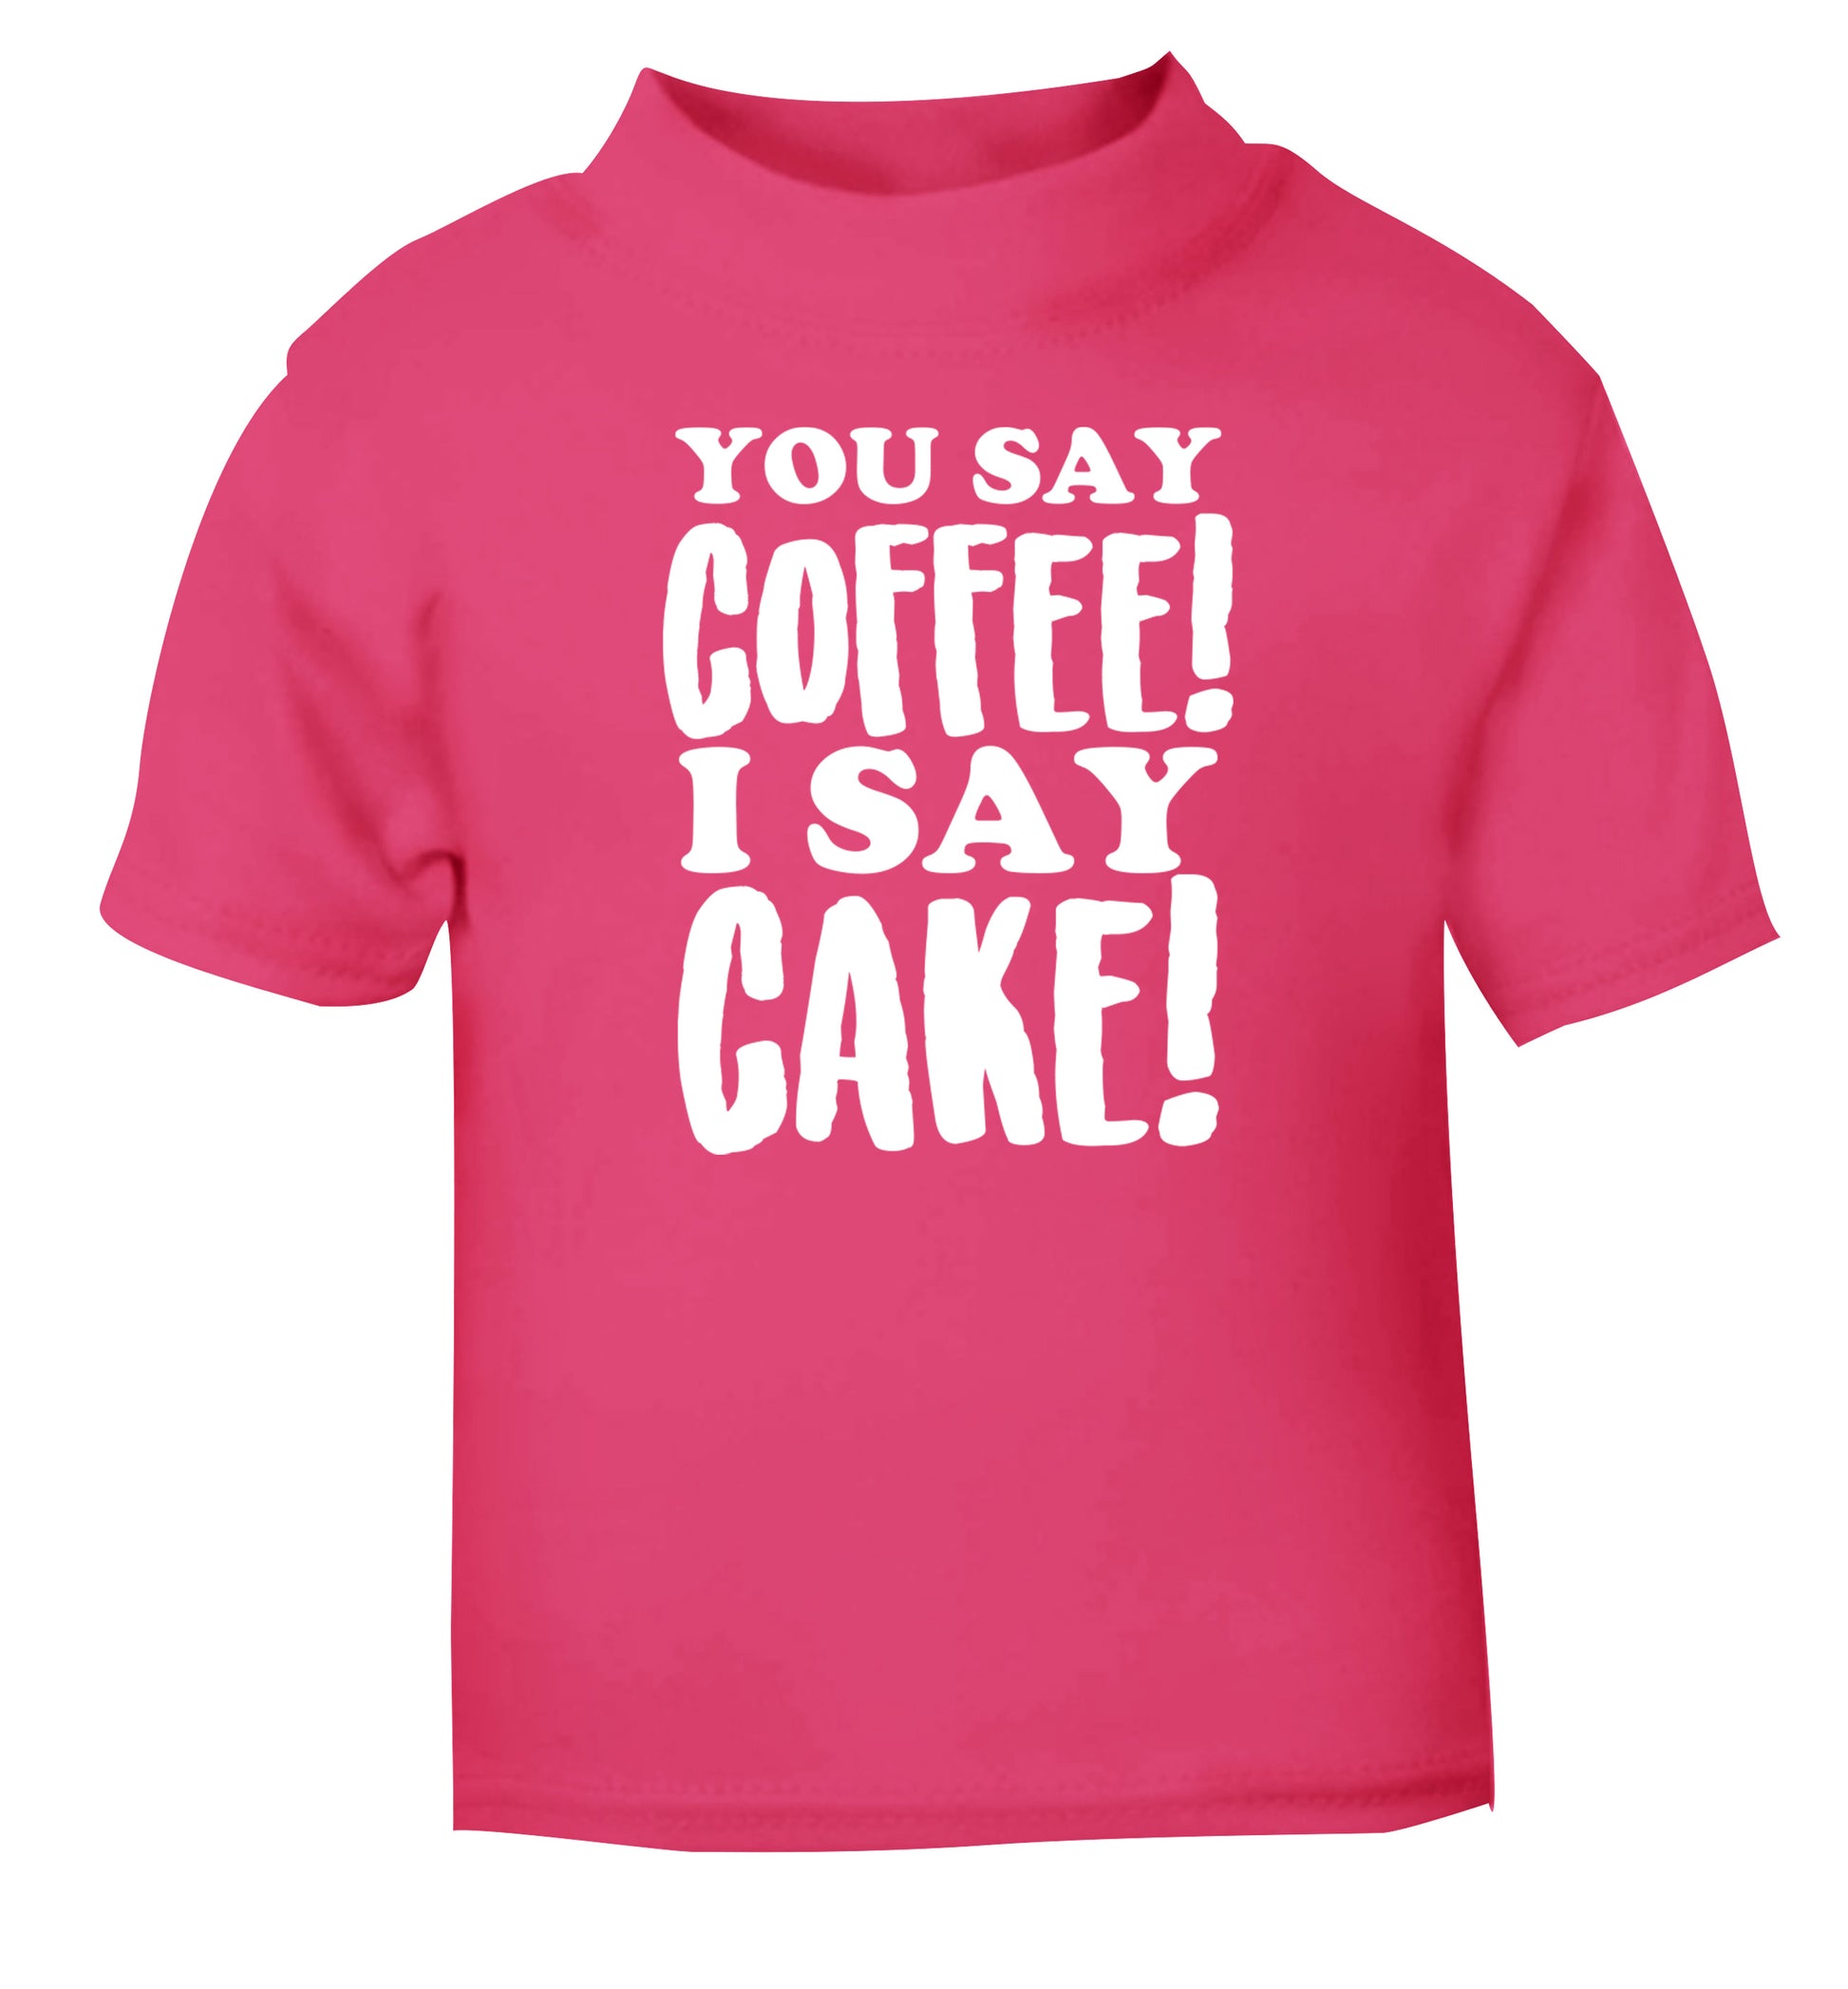 You say coffee I say cake! pink Baby Toddler Tshirt 2 Years